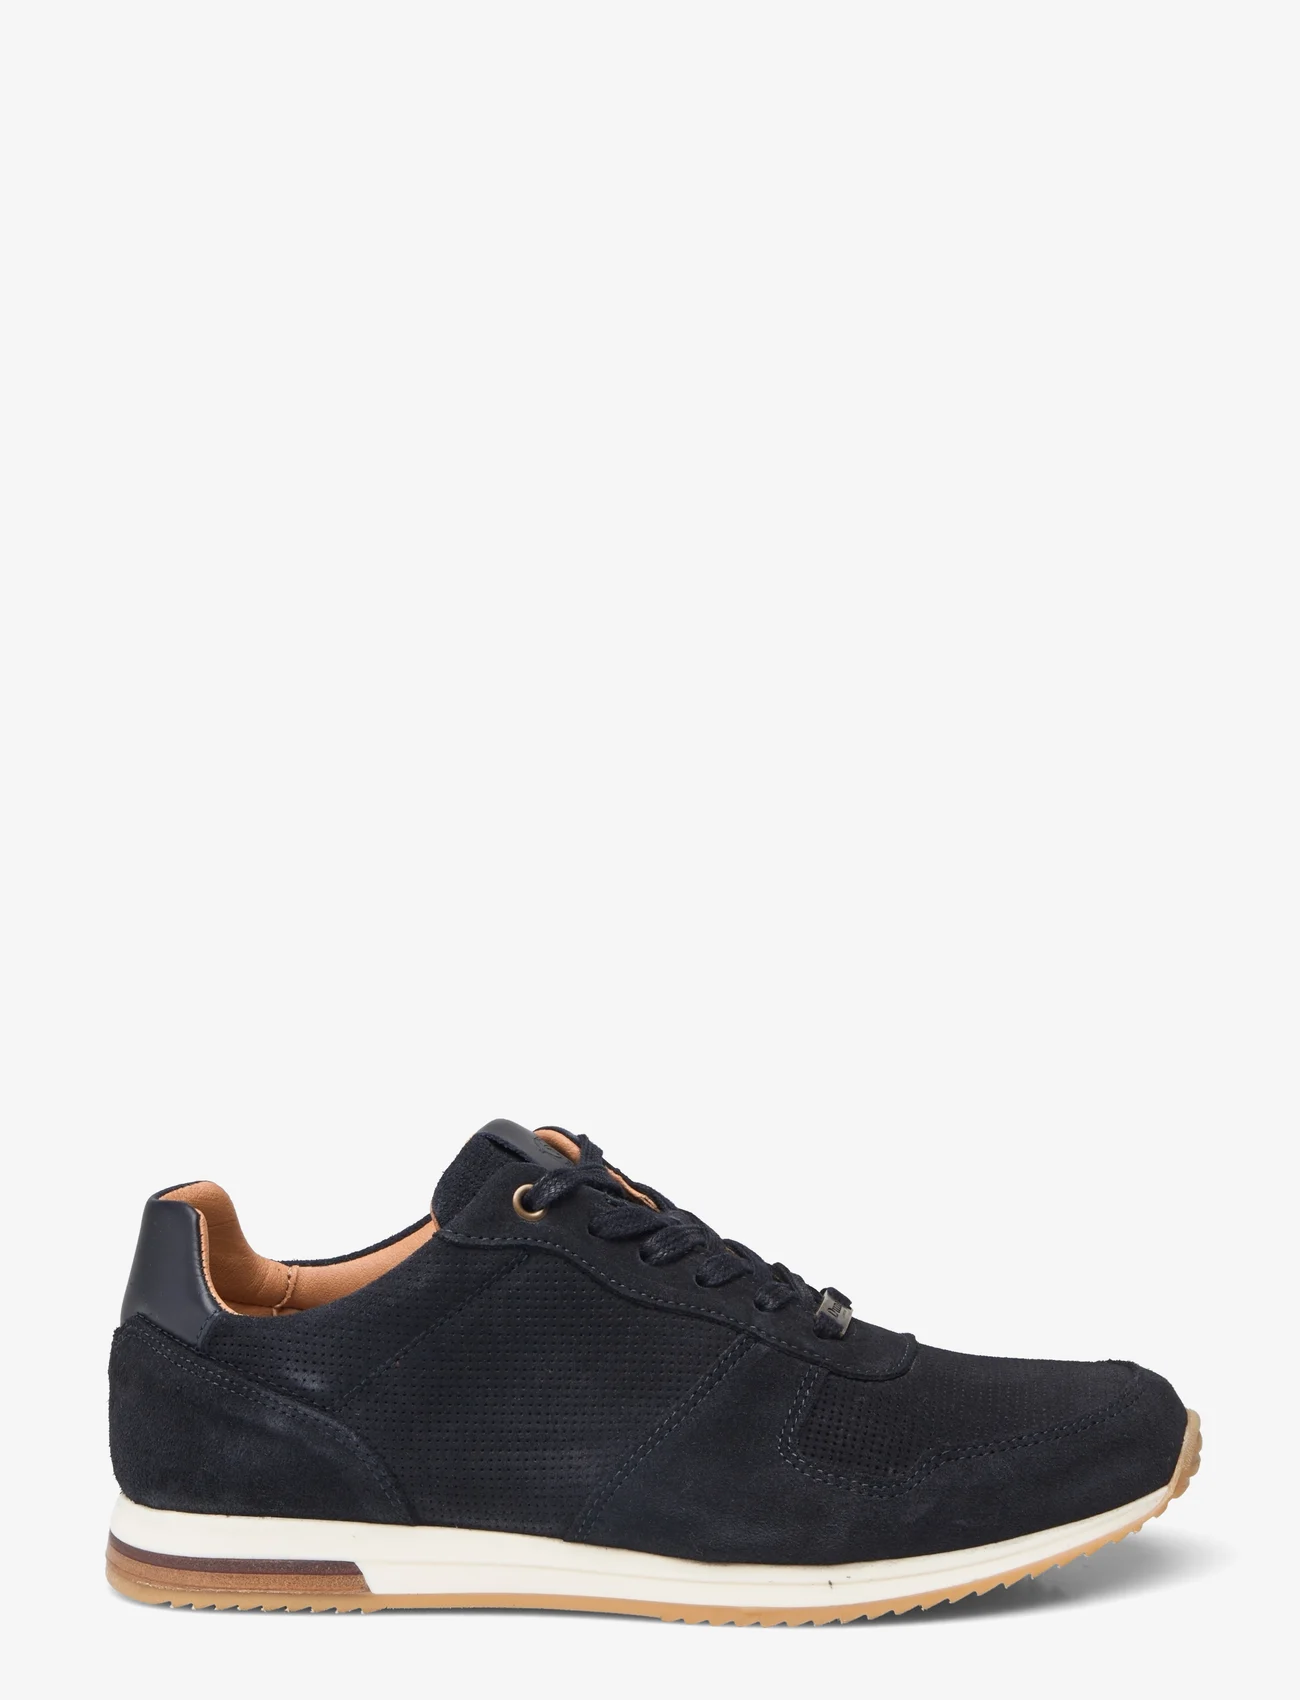 Dune London - trilogy - lave sneakers - navy - 1